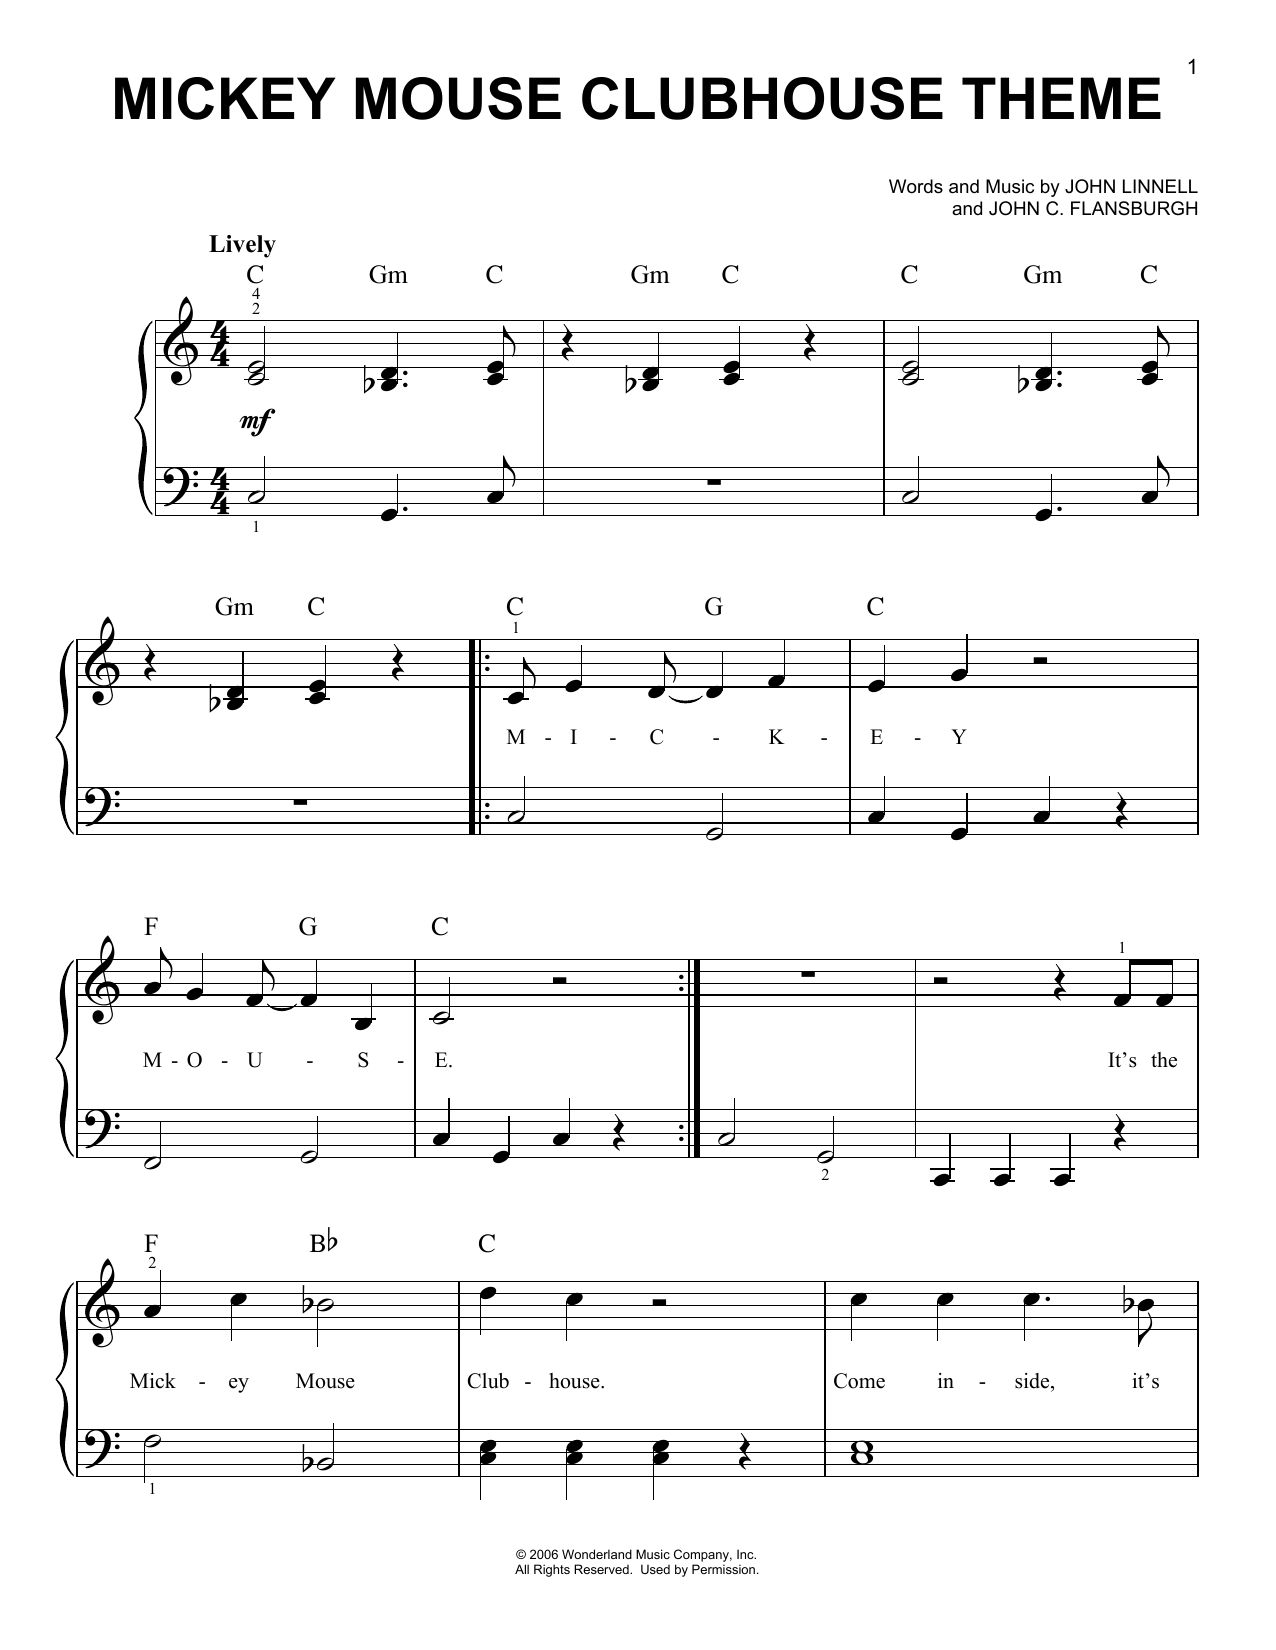 Download John Flansburgh & John Linnell Mickey Mouse Clubhouse Theme Sheet Music